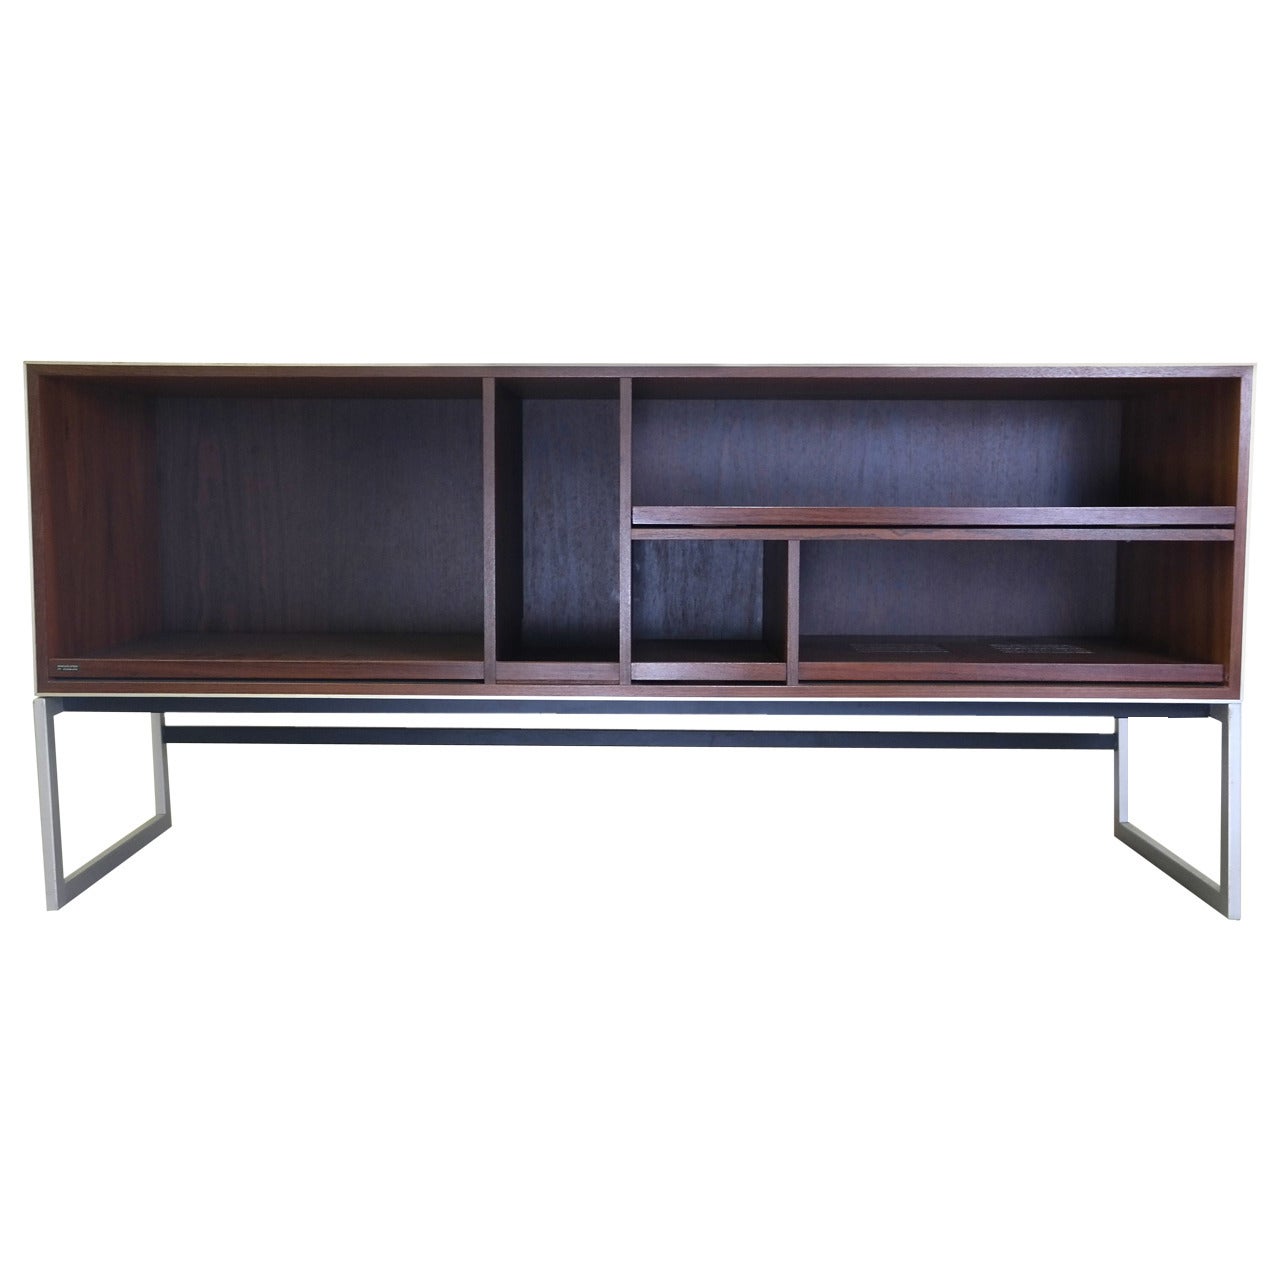 Bang & Olufsen Credenza Stereo Cabinet in Rosewood